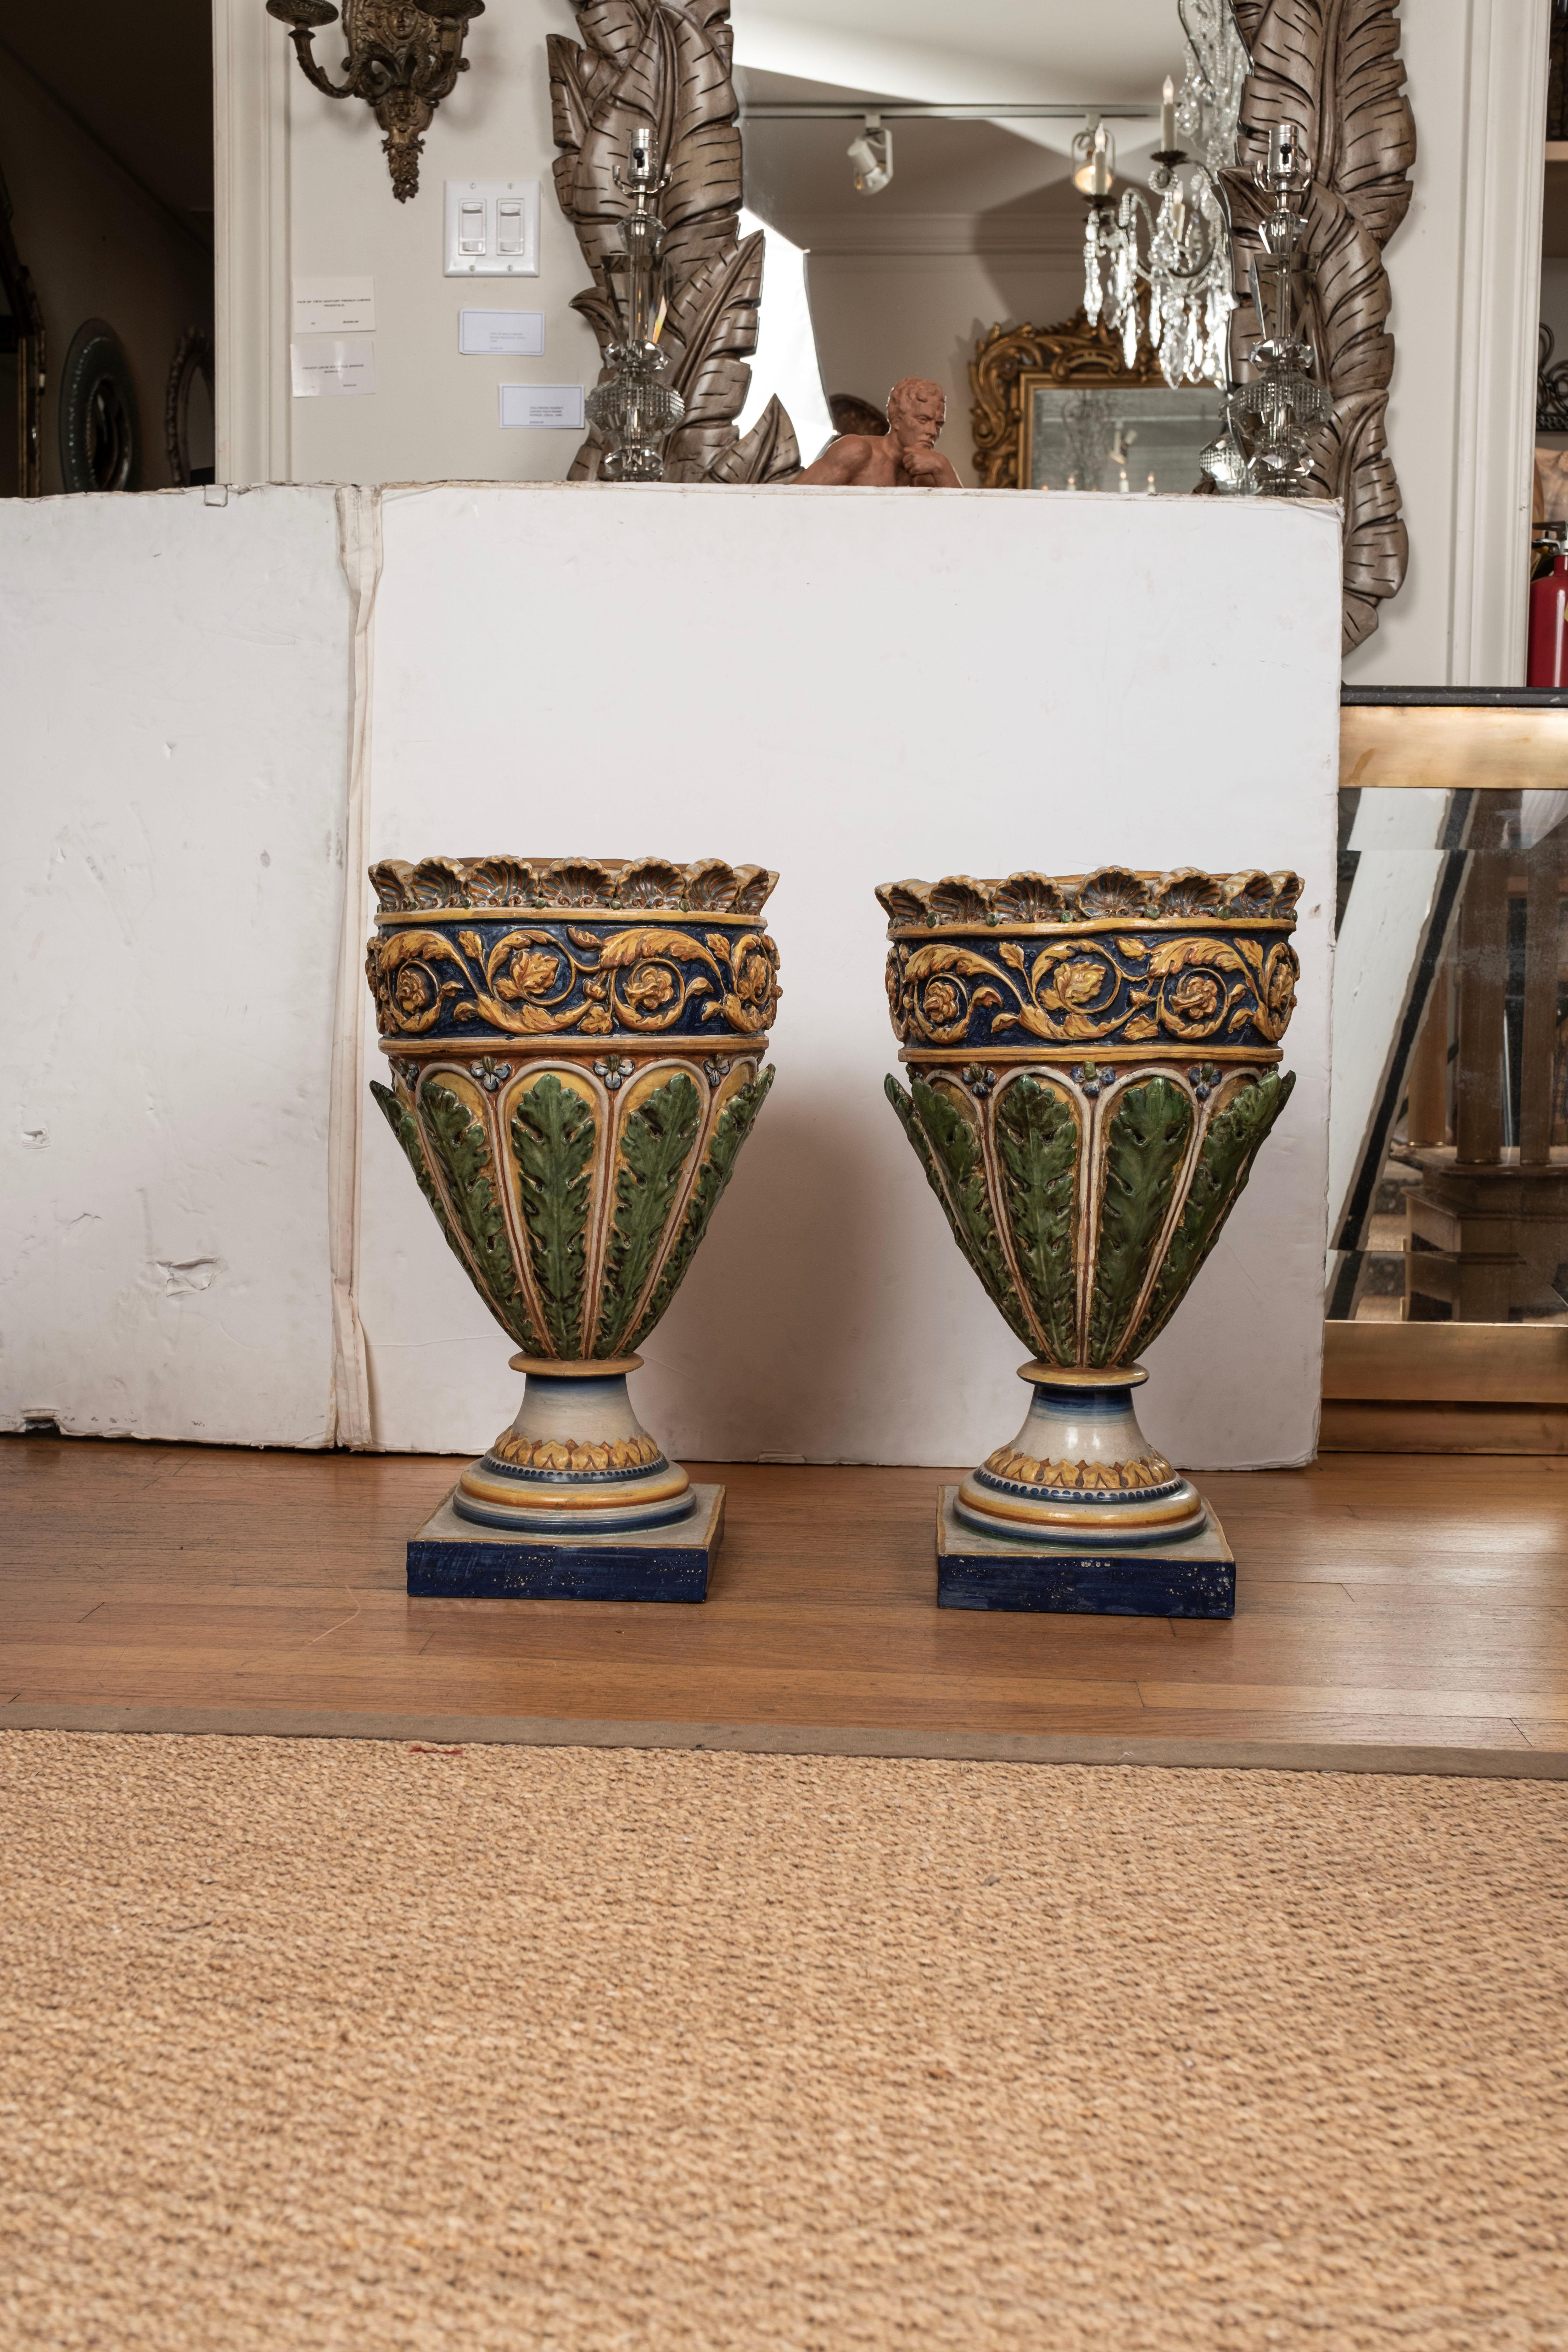 Pair of Italian glazed terracotta urns or planters.
This stunning pair of Italian glazed terracotta urns, planters or jardinieres are from the Amalfi coast and feature beautiful blues, golds, green and cream colors with a shell motif. Lovely as